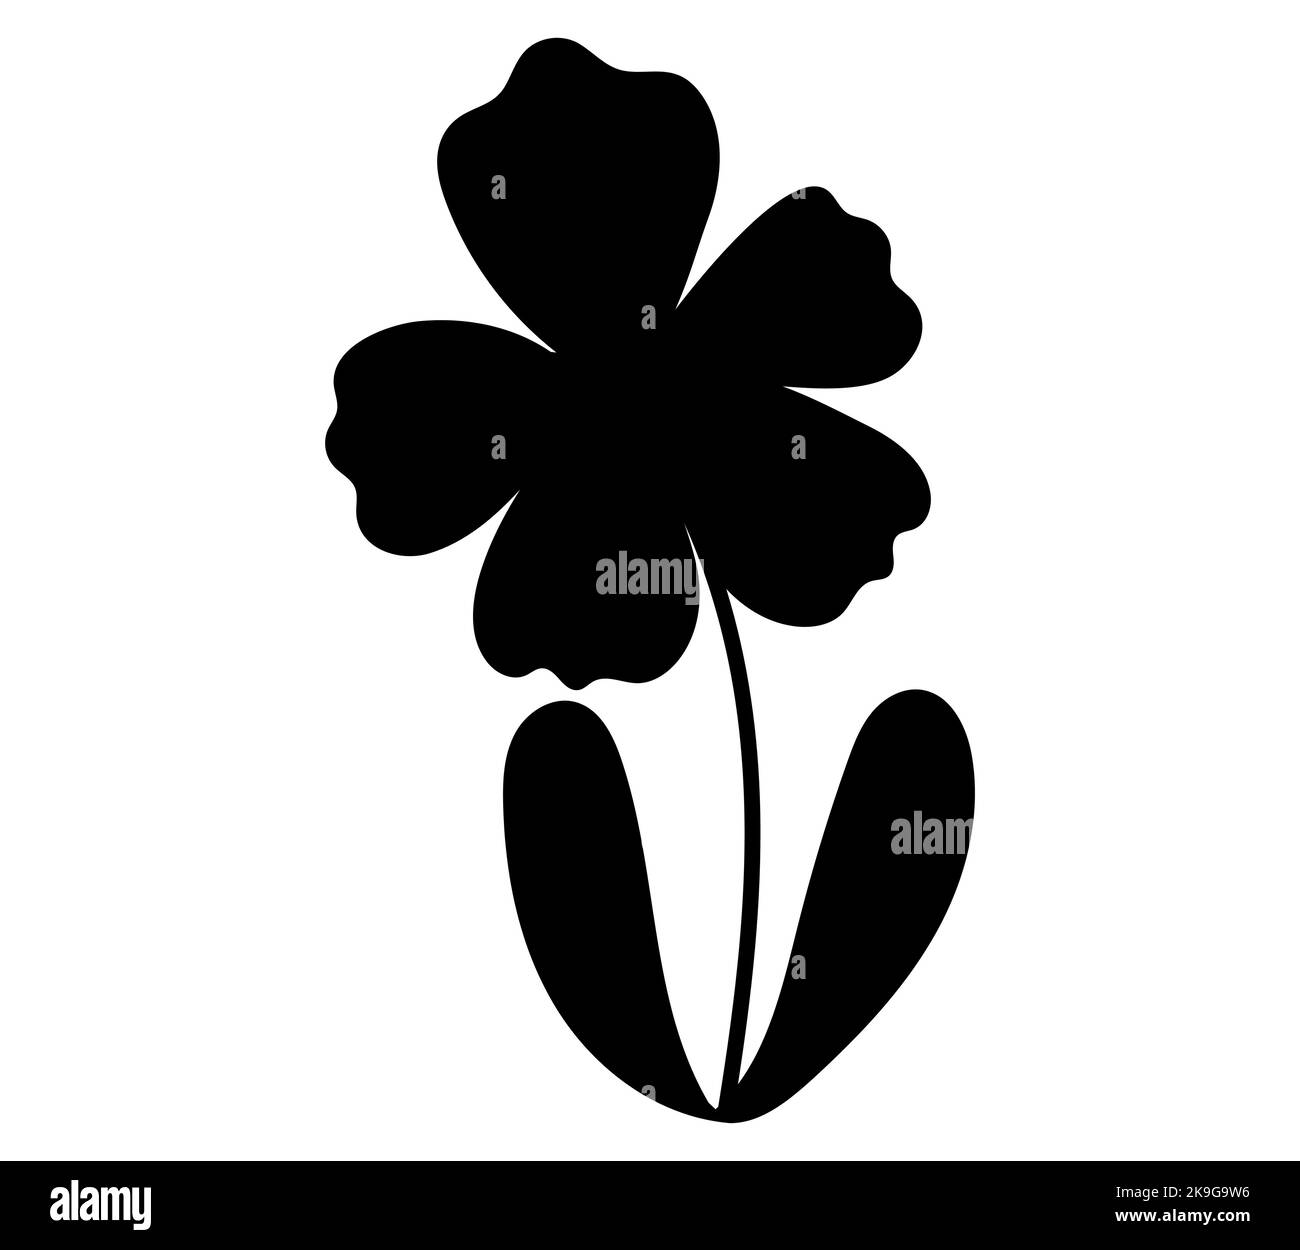 Plants flowers leaf silhouettes vector illustration Stock Vector